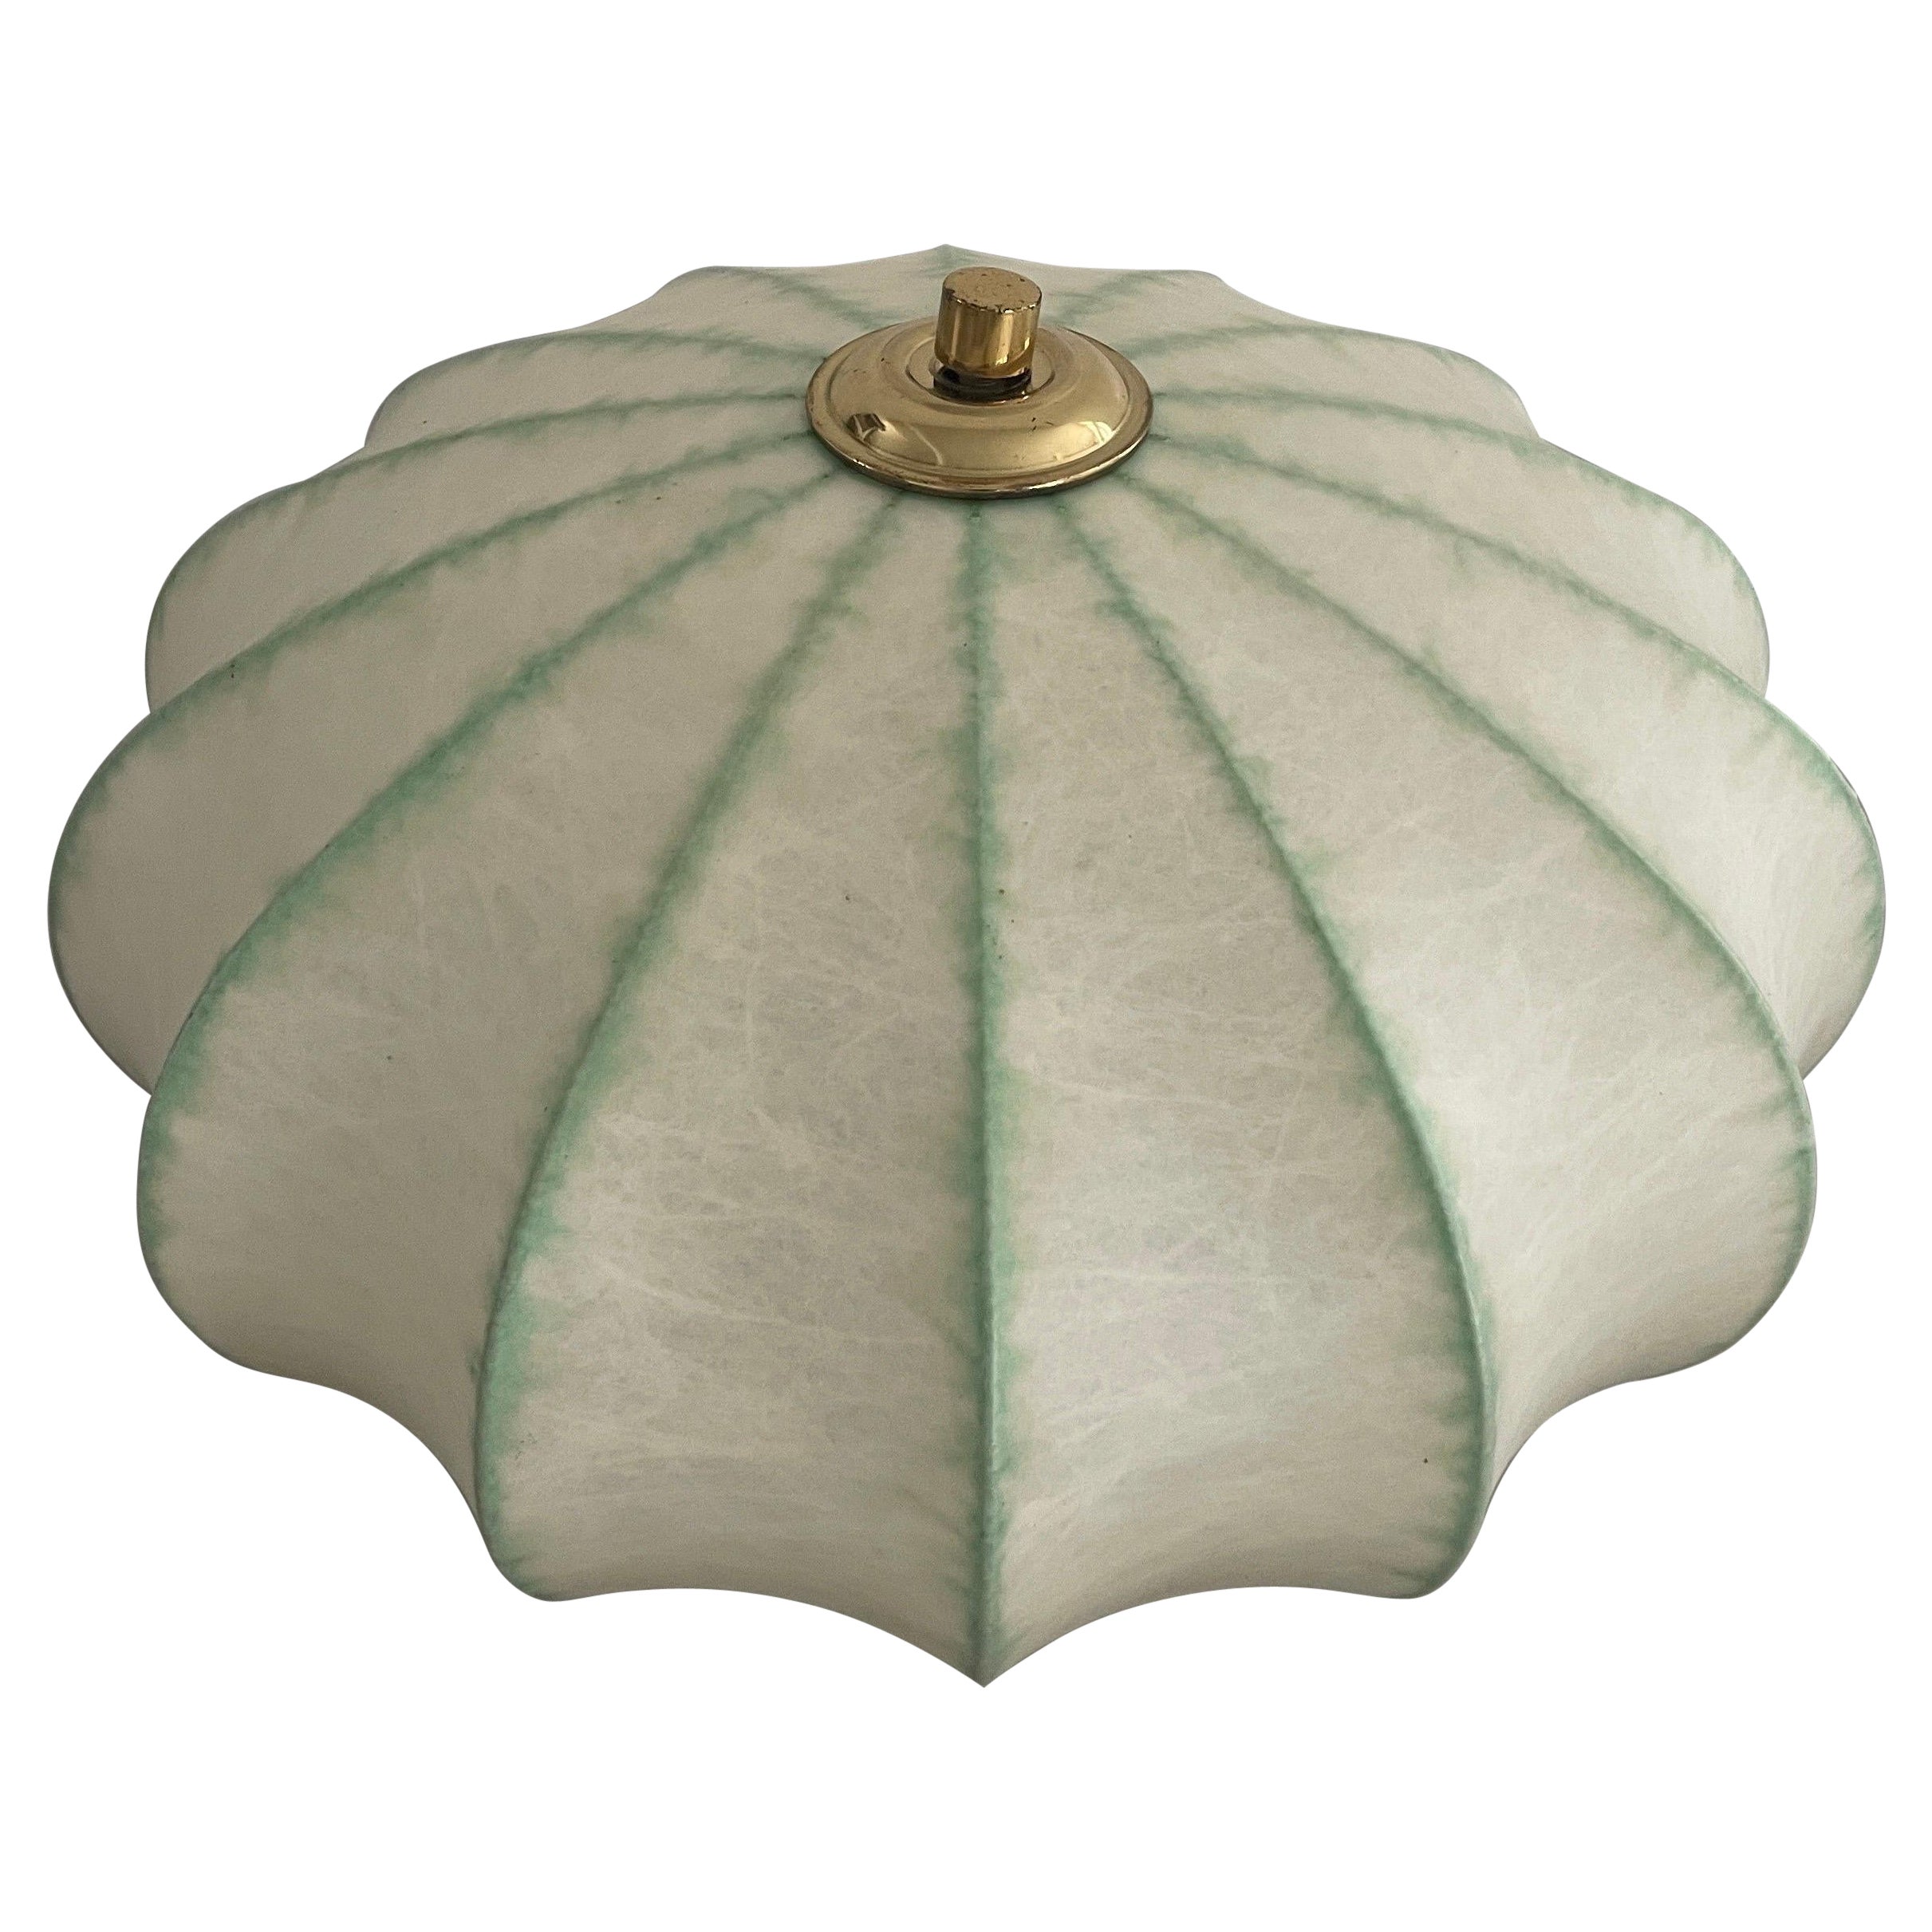 Cocoon Flush Mount Ceiling Lamp by Goldkant, 1960s, Germany